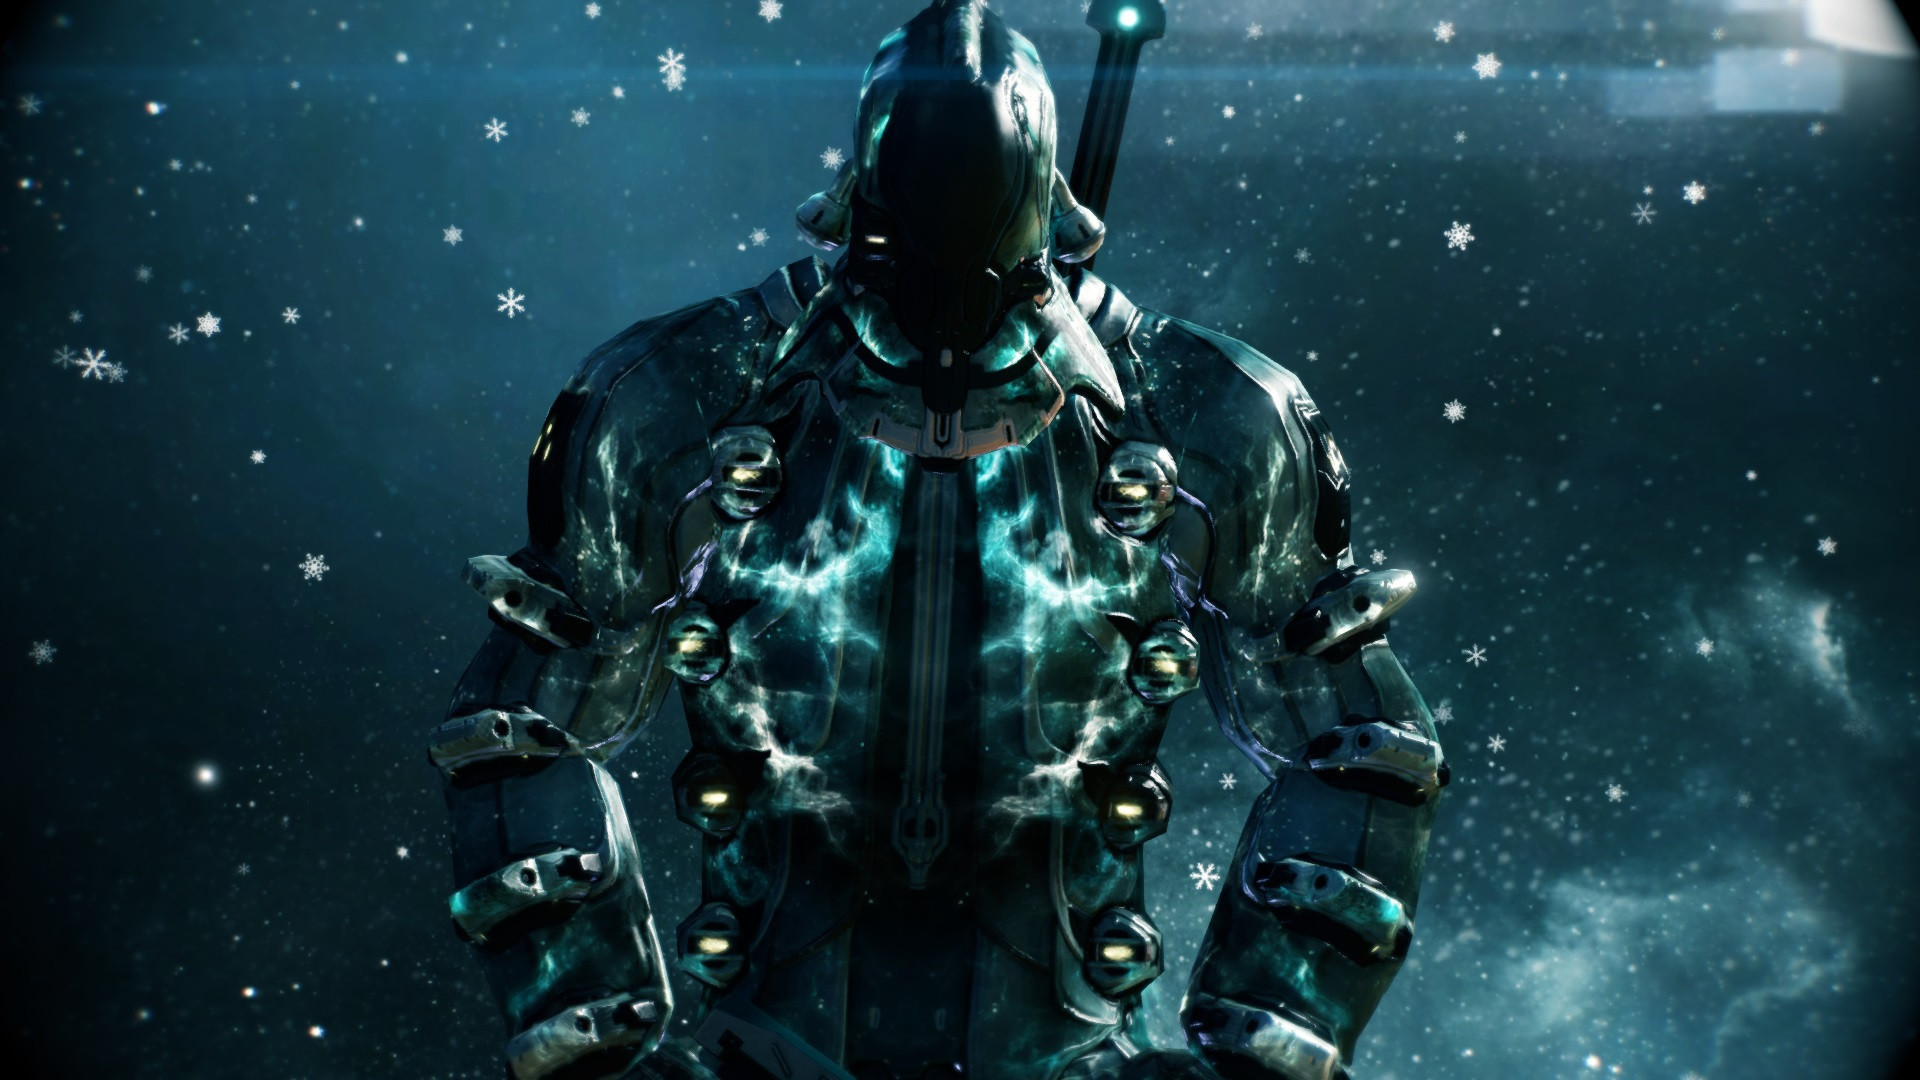 1920x1080 ... Warframe Super HD Wallpapers - ZGF-Full HD Background Images ...